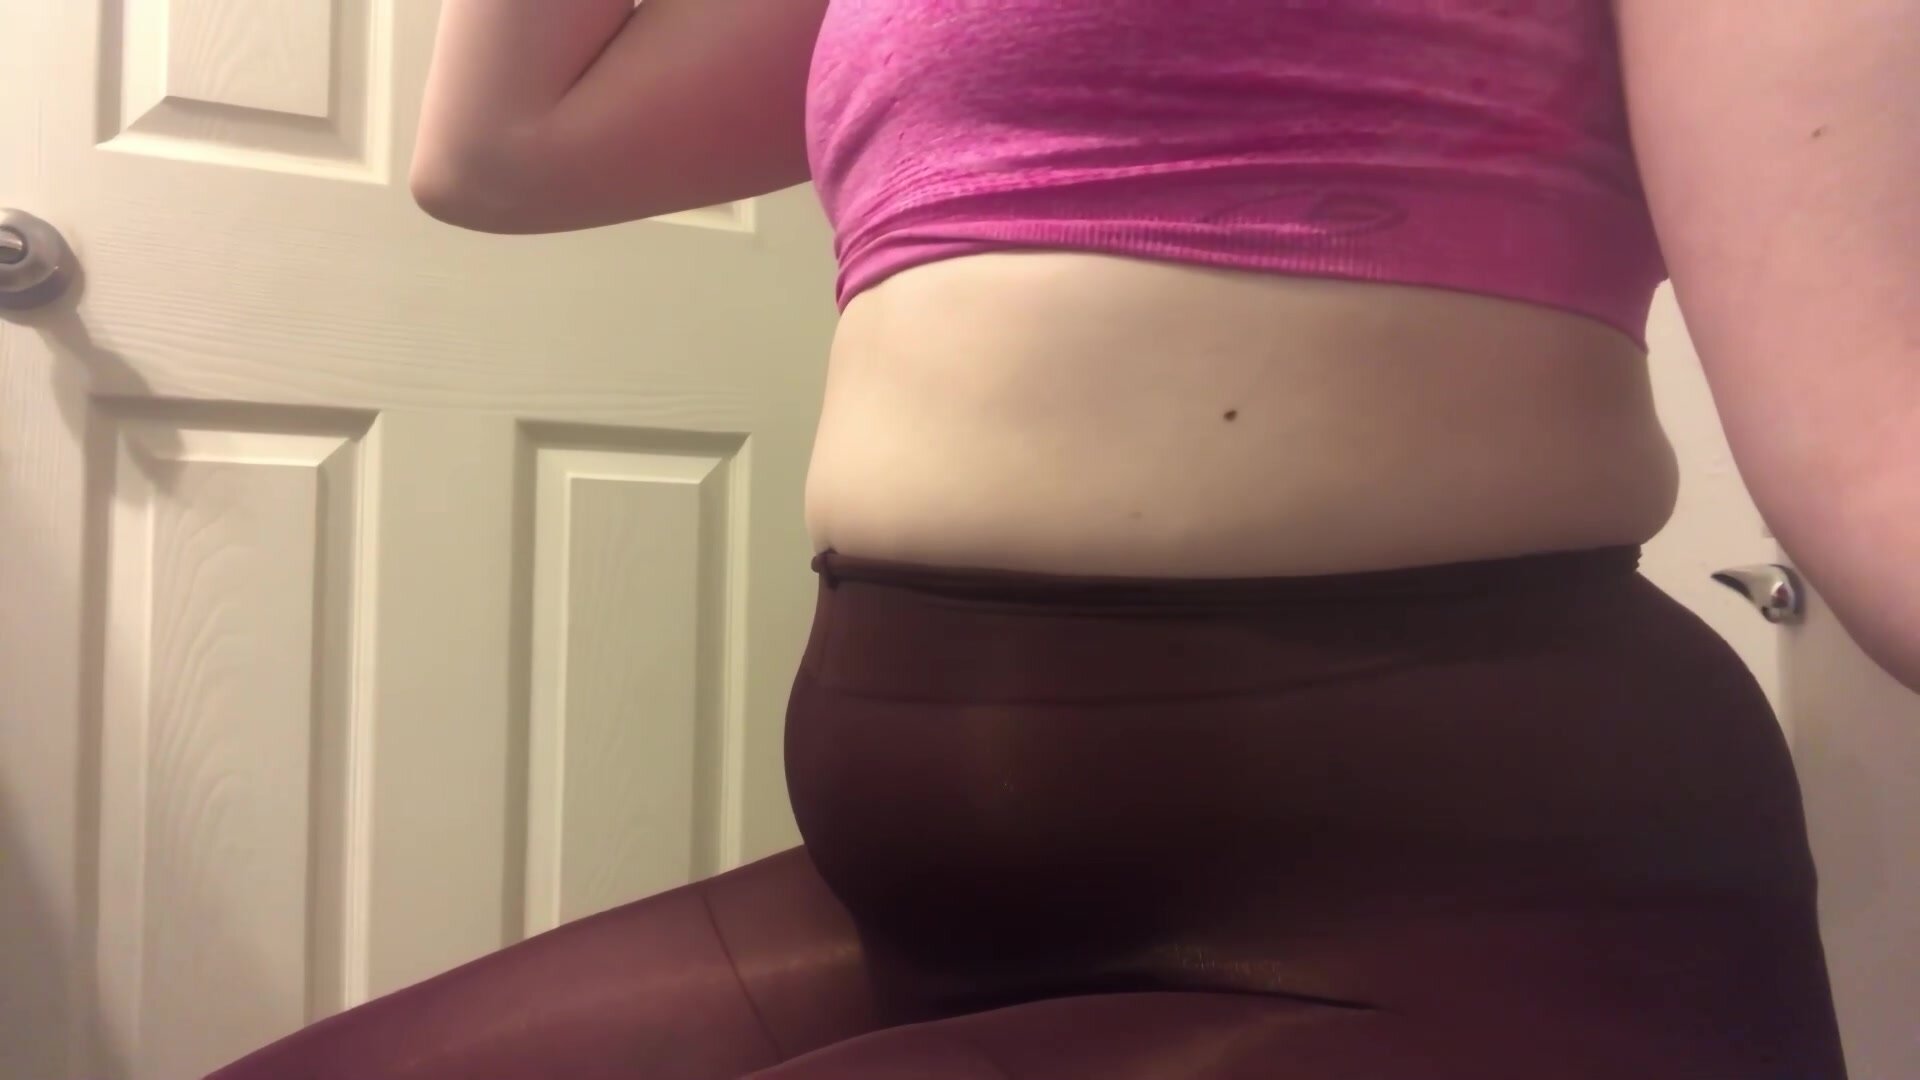 Massive Water Bloat in Tight Panty Hose